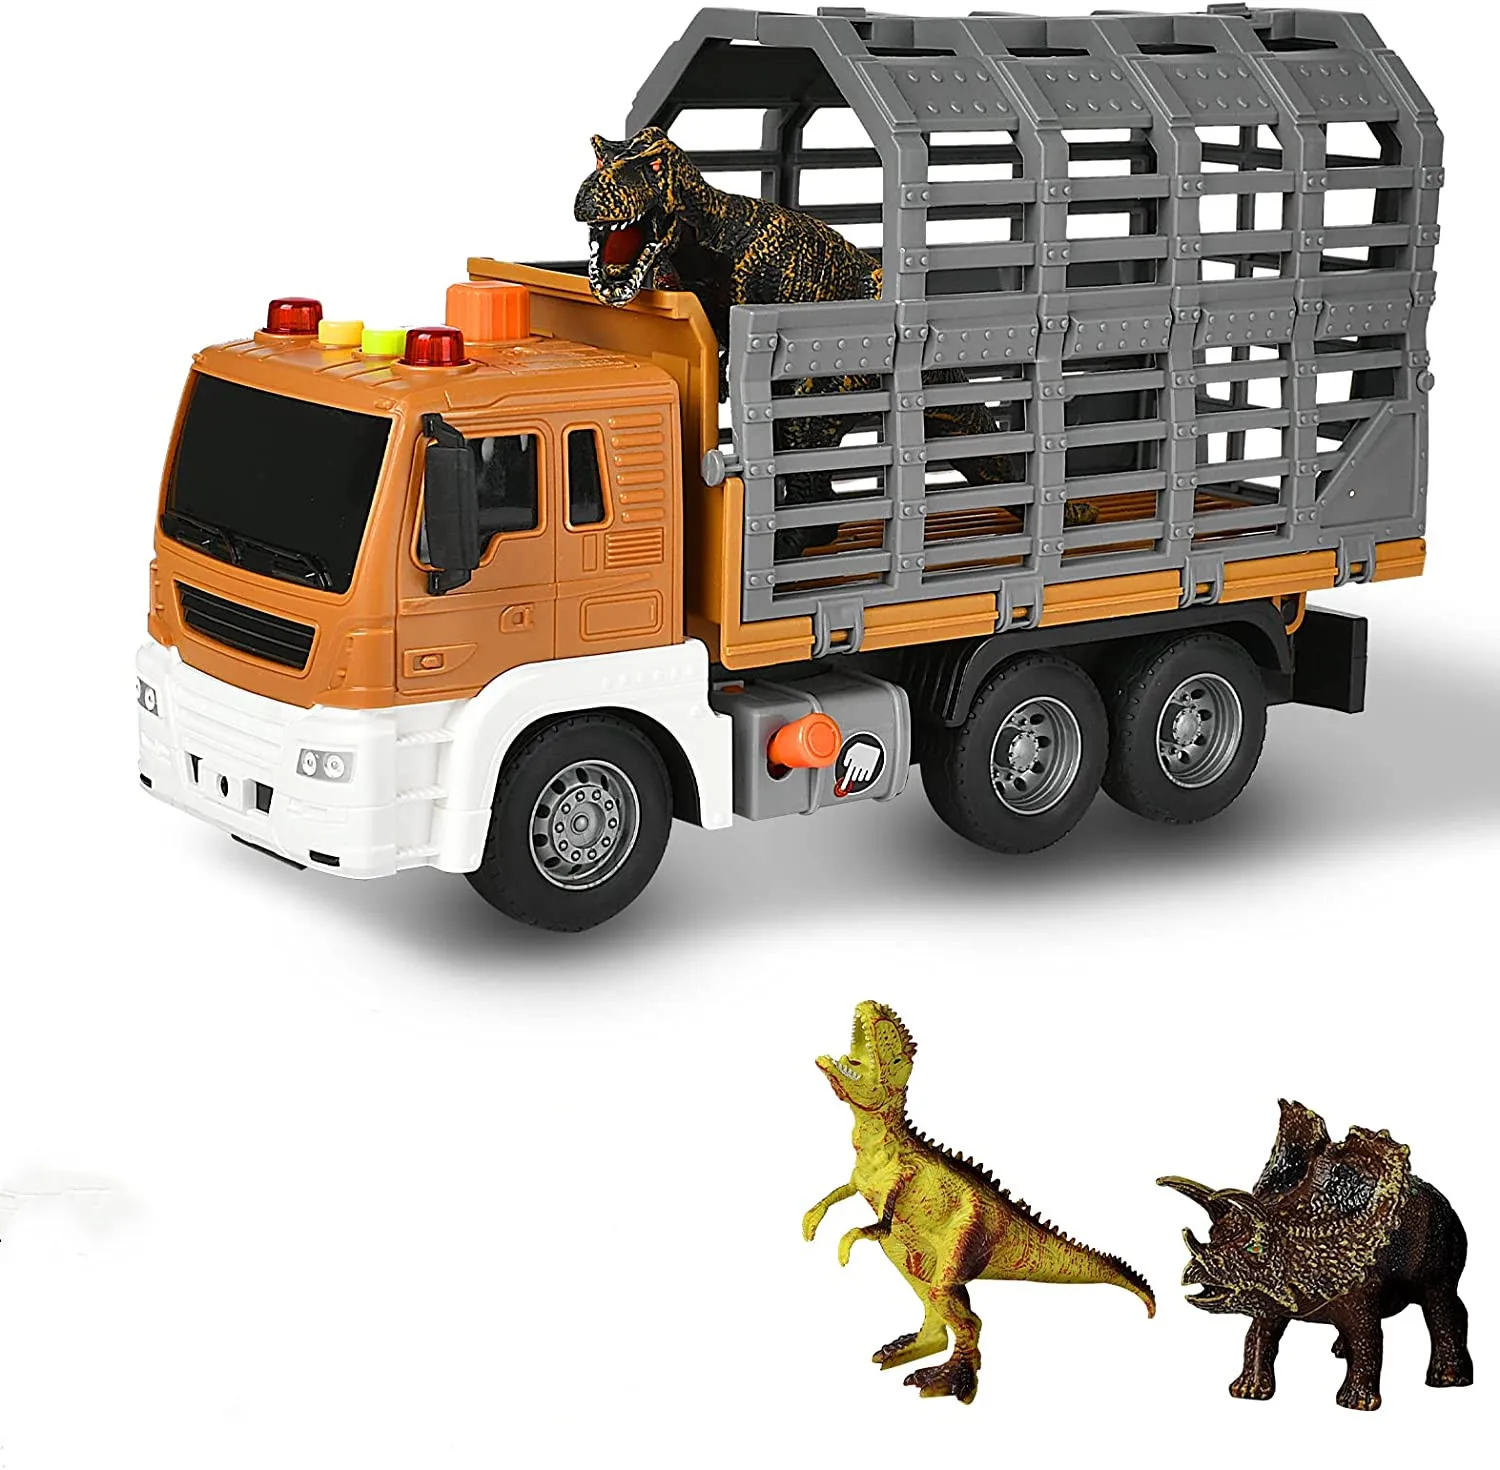 Dinosaur Dump Truck with cage Sound and Light Toy Trucks with 4 Dinosaurs Friction-Powered Toy Truck 2019 new animal 3d transforming dinosaur car toy for boysplastic battery led car with light sound for children kids birthday toy